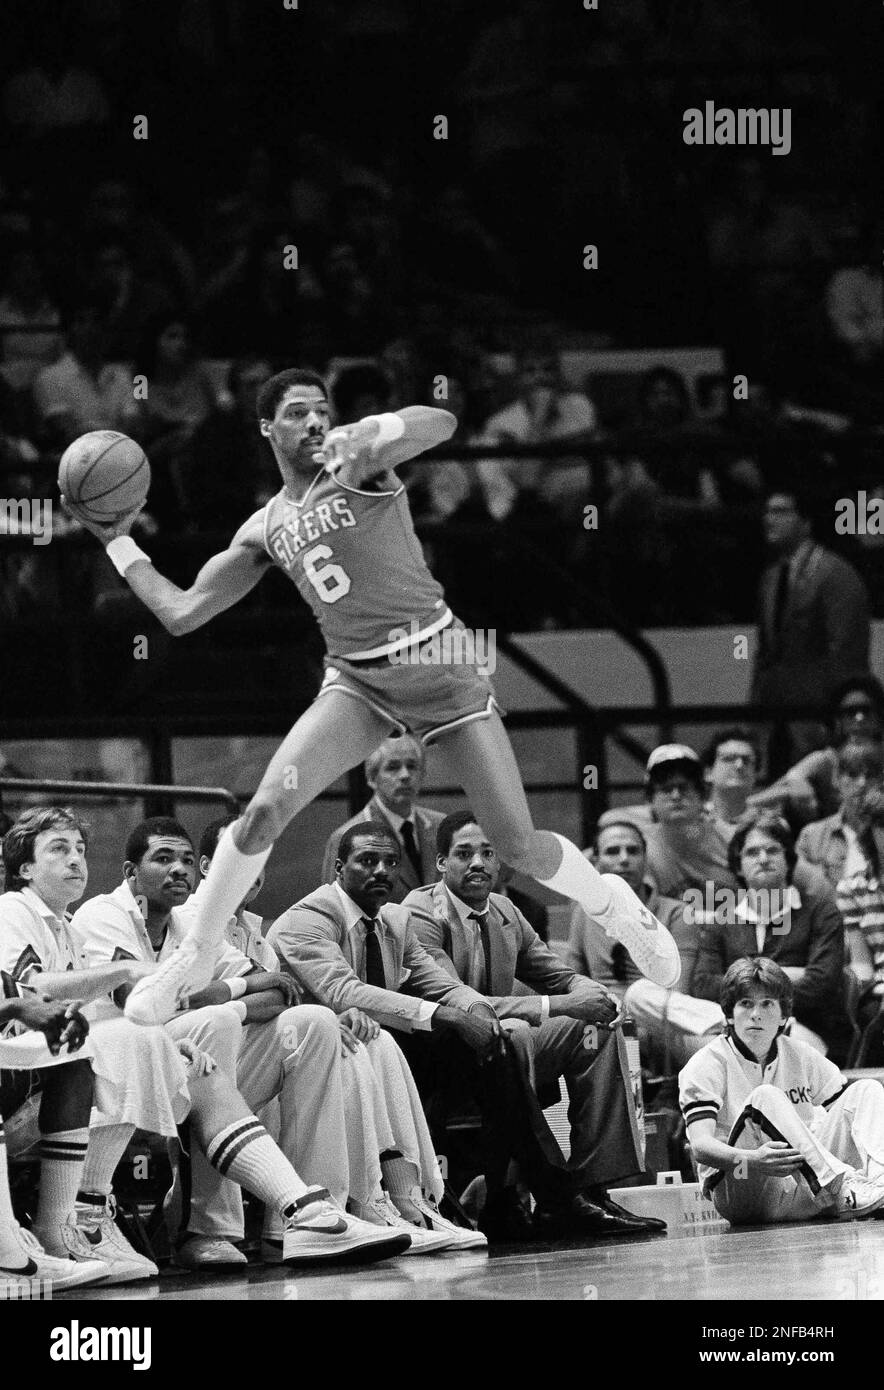 Julius Erving of the Philadelphia 76ers call out a play during a